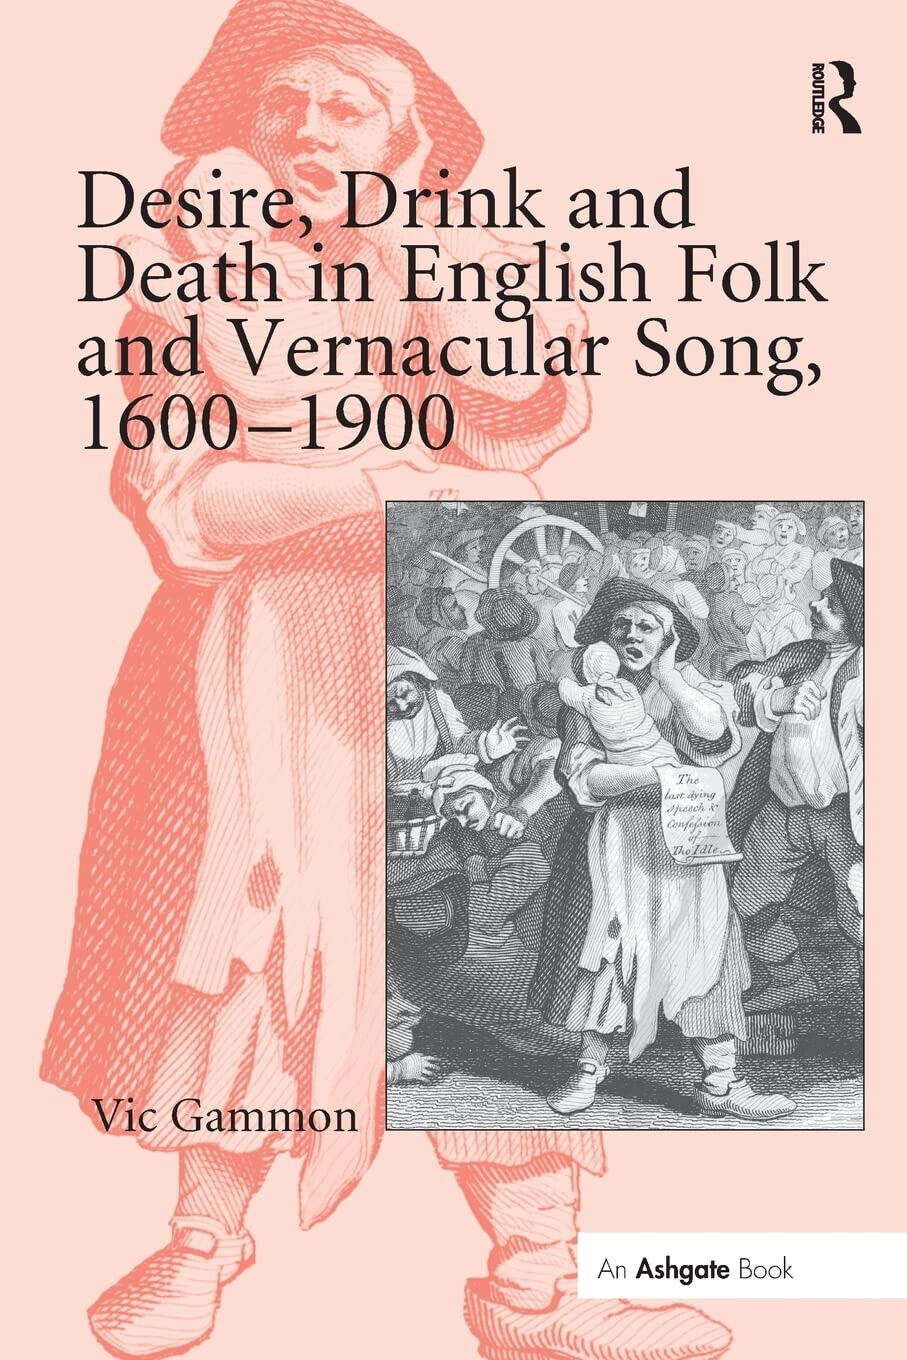 Desire, Drink and Death in English Folk and Vernacular Song, 1600-1900 - 2016 libro usato